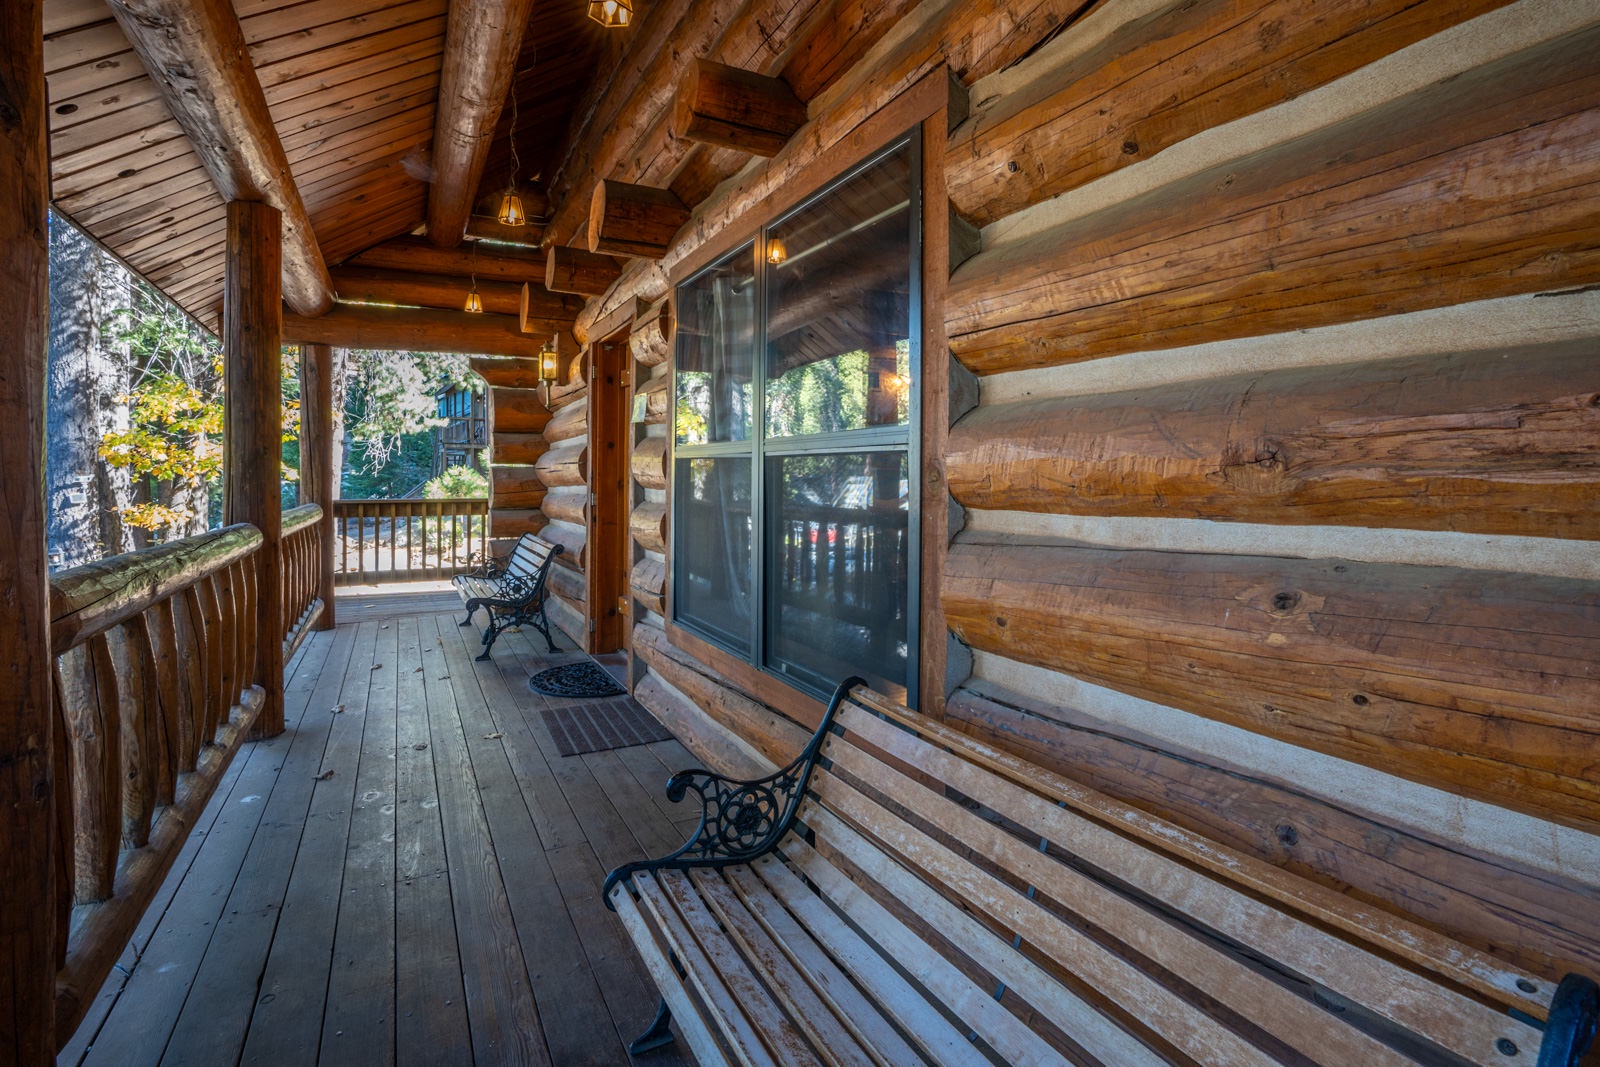 Rest in the fresh Yosemite air on the front porch/balcony!